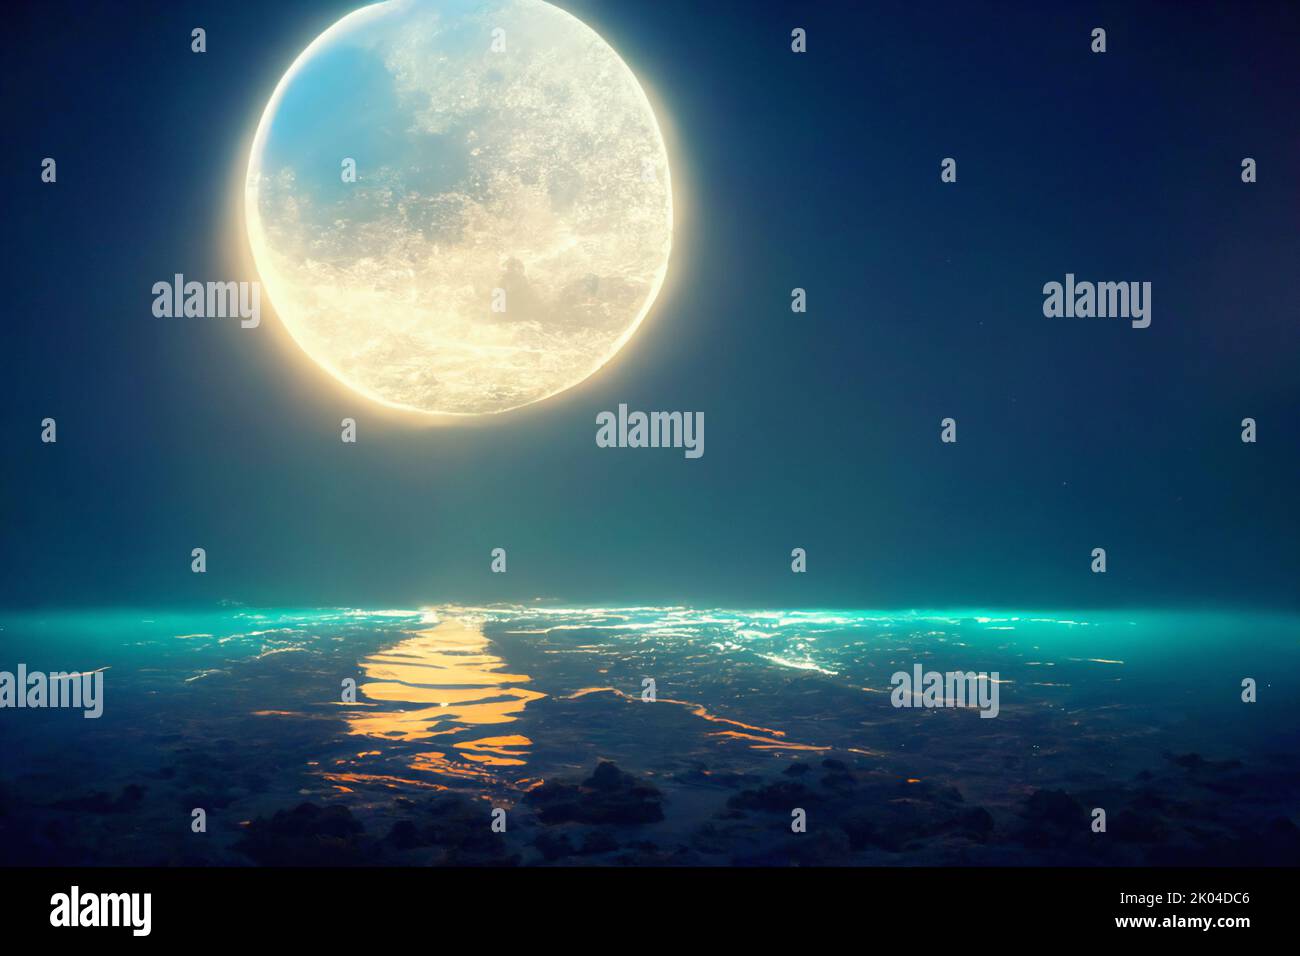 Full moon reflected in smooth calm water surface, imaginary abstract painting background Stock Photo